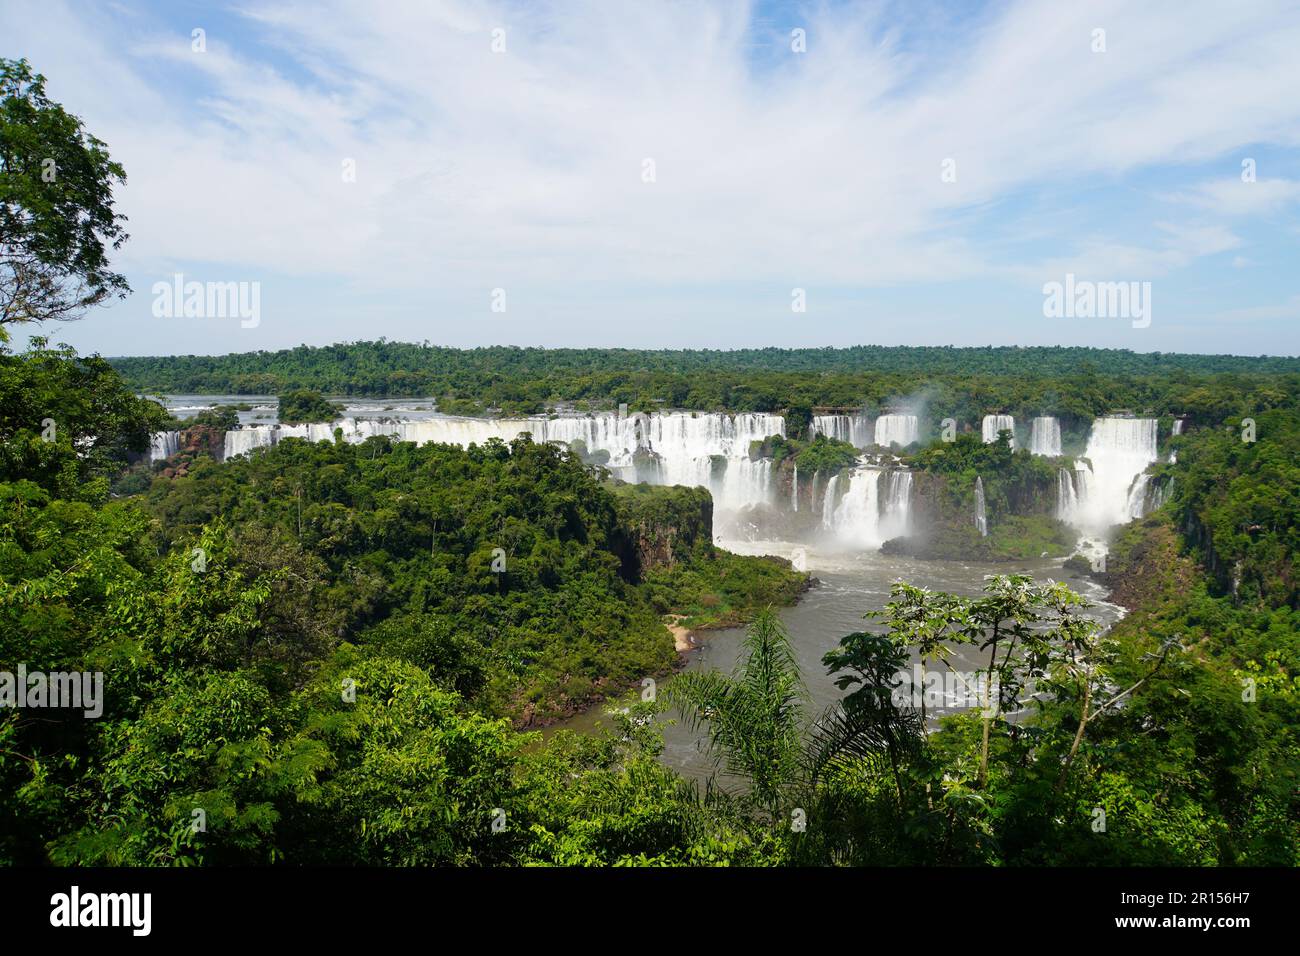 A Spectacular View of Iguazu Falls from Brazil Stock Photo